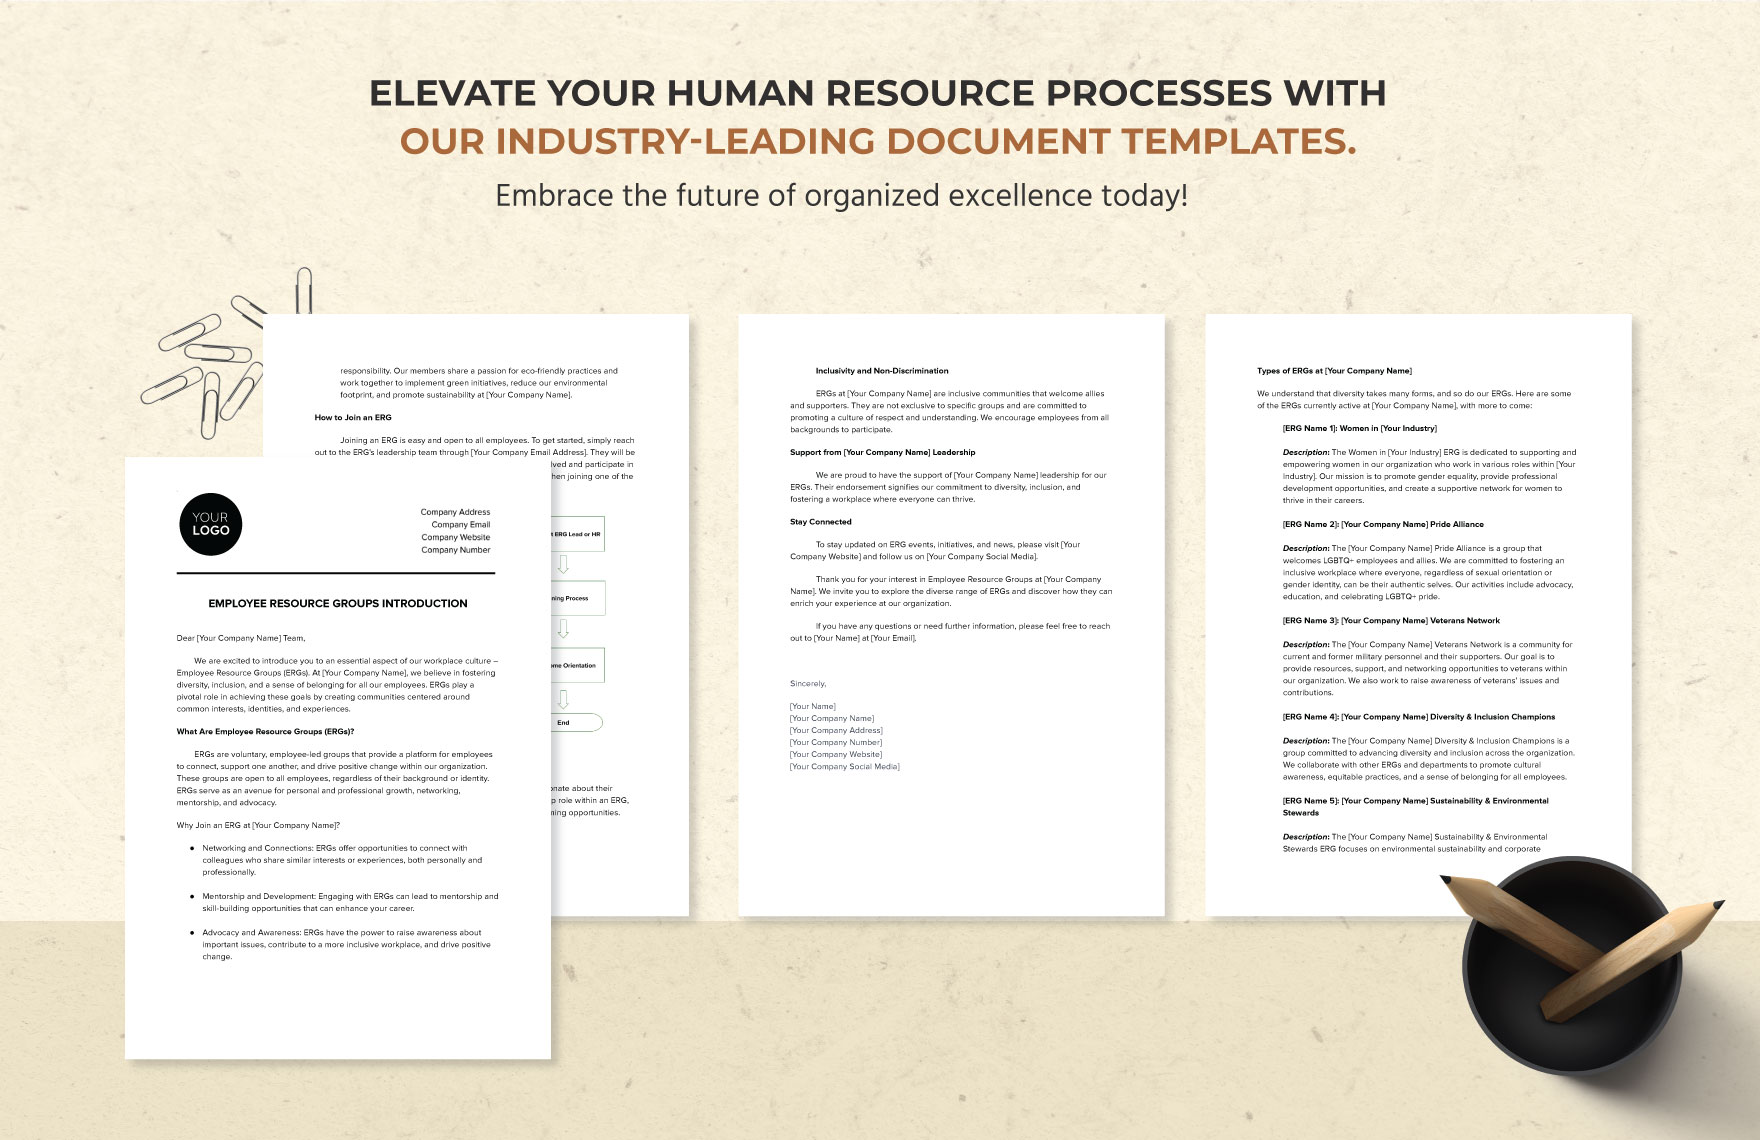 Employee Resource Groups Introduction HR Template